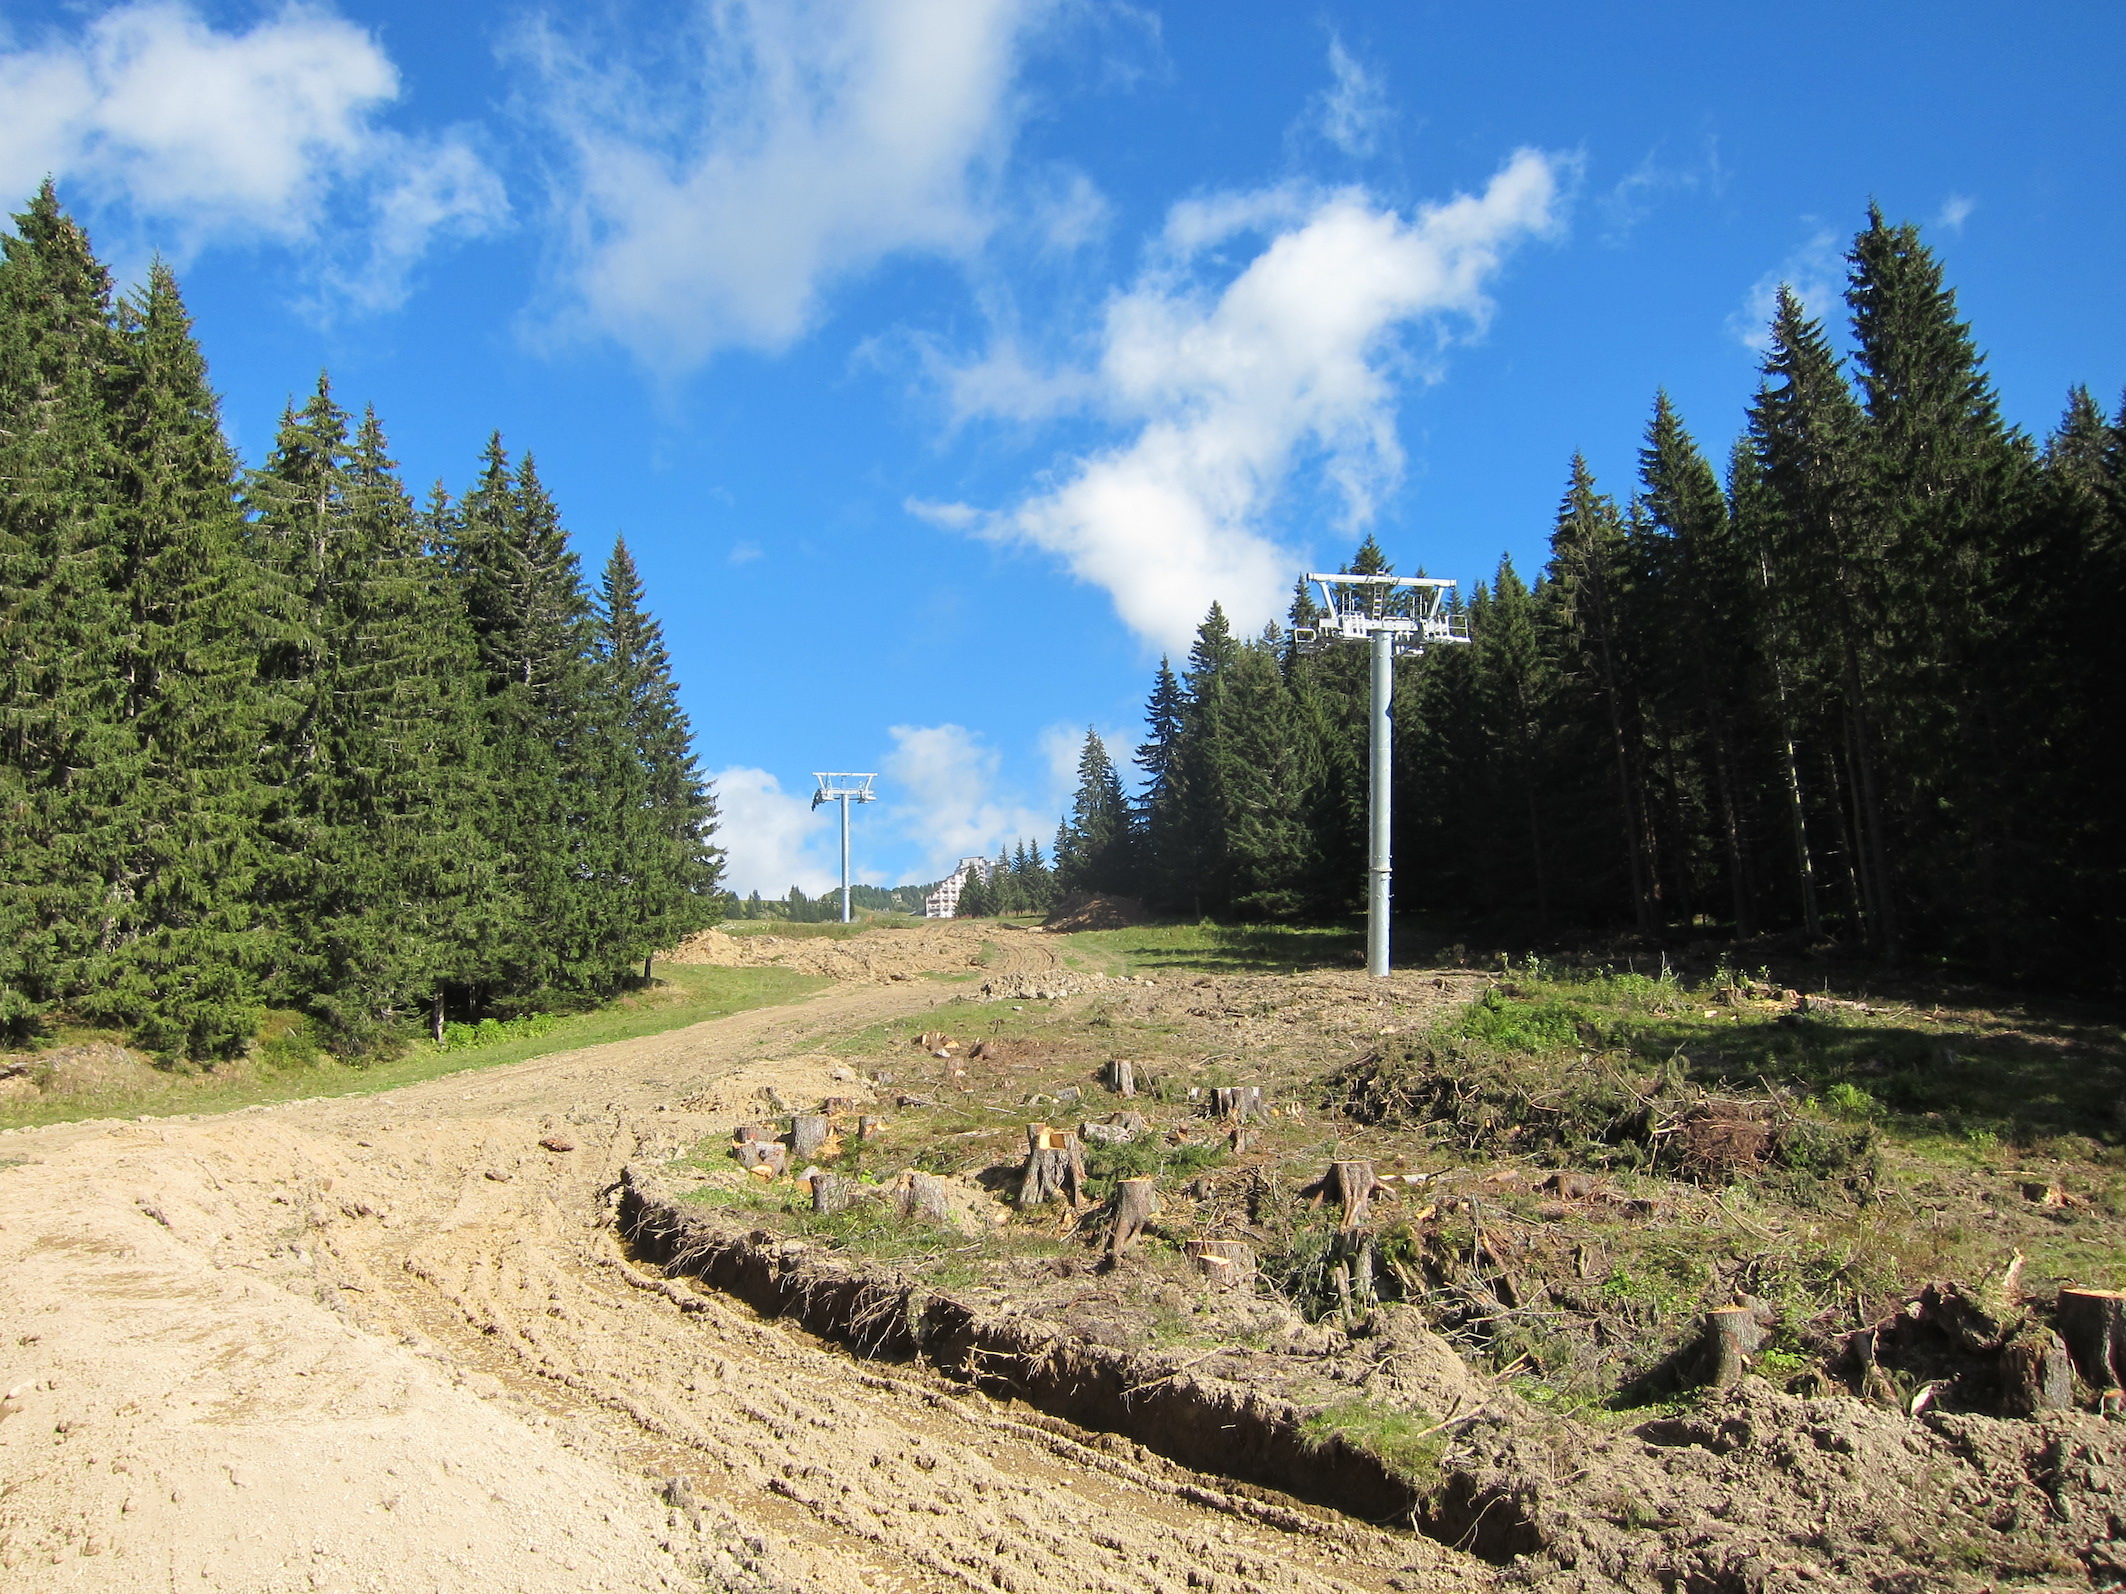 Lots of trees have been cut down to widen the bottom of the Proclou slope.